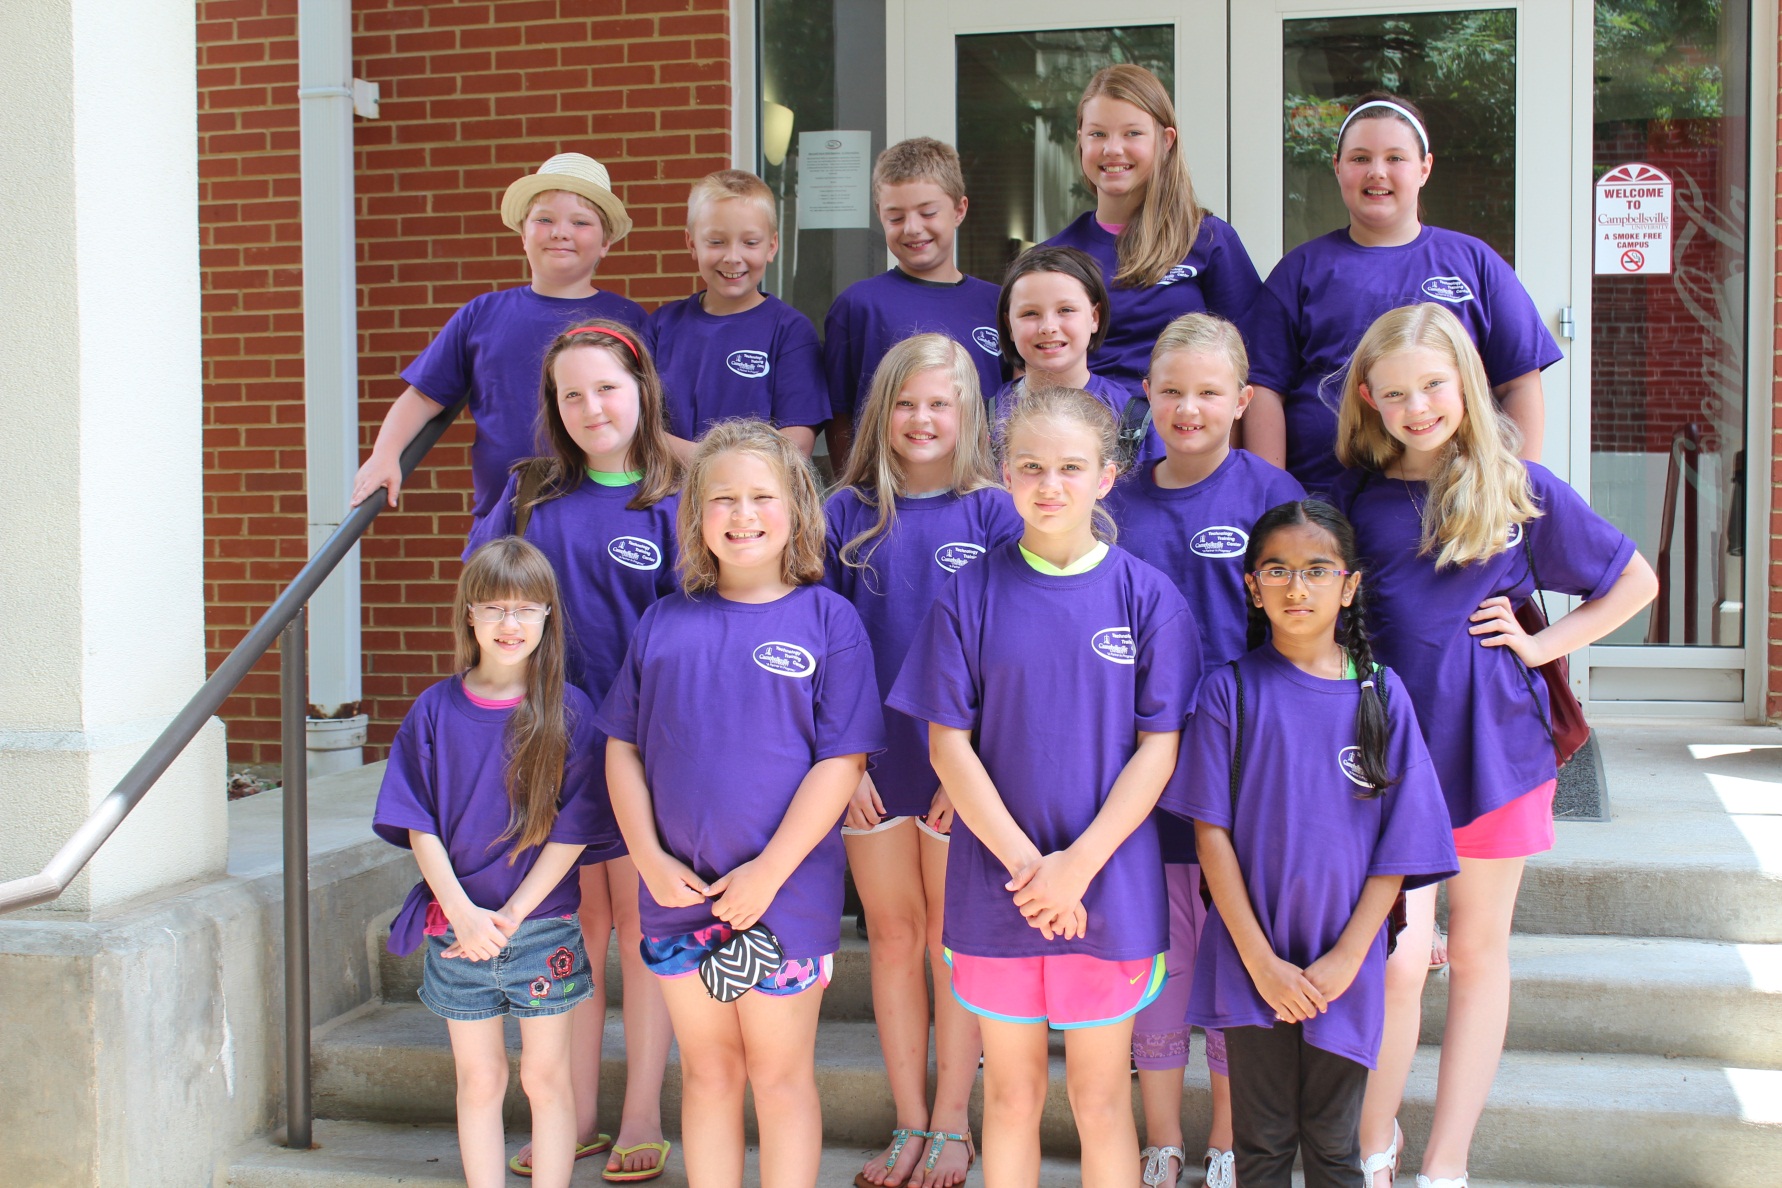 Students who participated in the Campbellsville University Kids College program include from left: Front row – Cailet Clark, Lacey Sexton, Meghan Squires and Maitry Dave. Middle row -- Haley Sparkman, Ashtyn Harmon, Riley Milby, Allie Judd and Whitney Frashure. Back row -- George Prebee, Kaine Murphy, Tyler Pogue, Gracie Pogue and Kate Judd. (Campbellsville University Photo by Carol Sullivan)